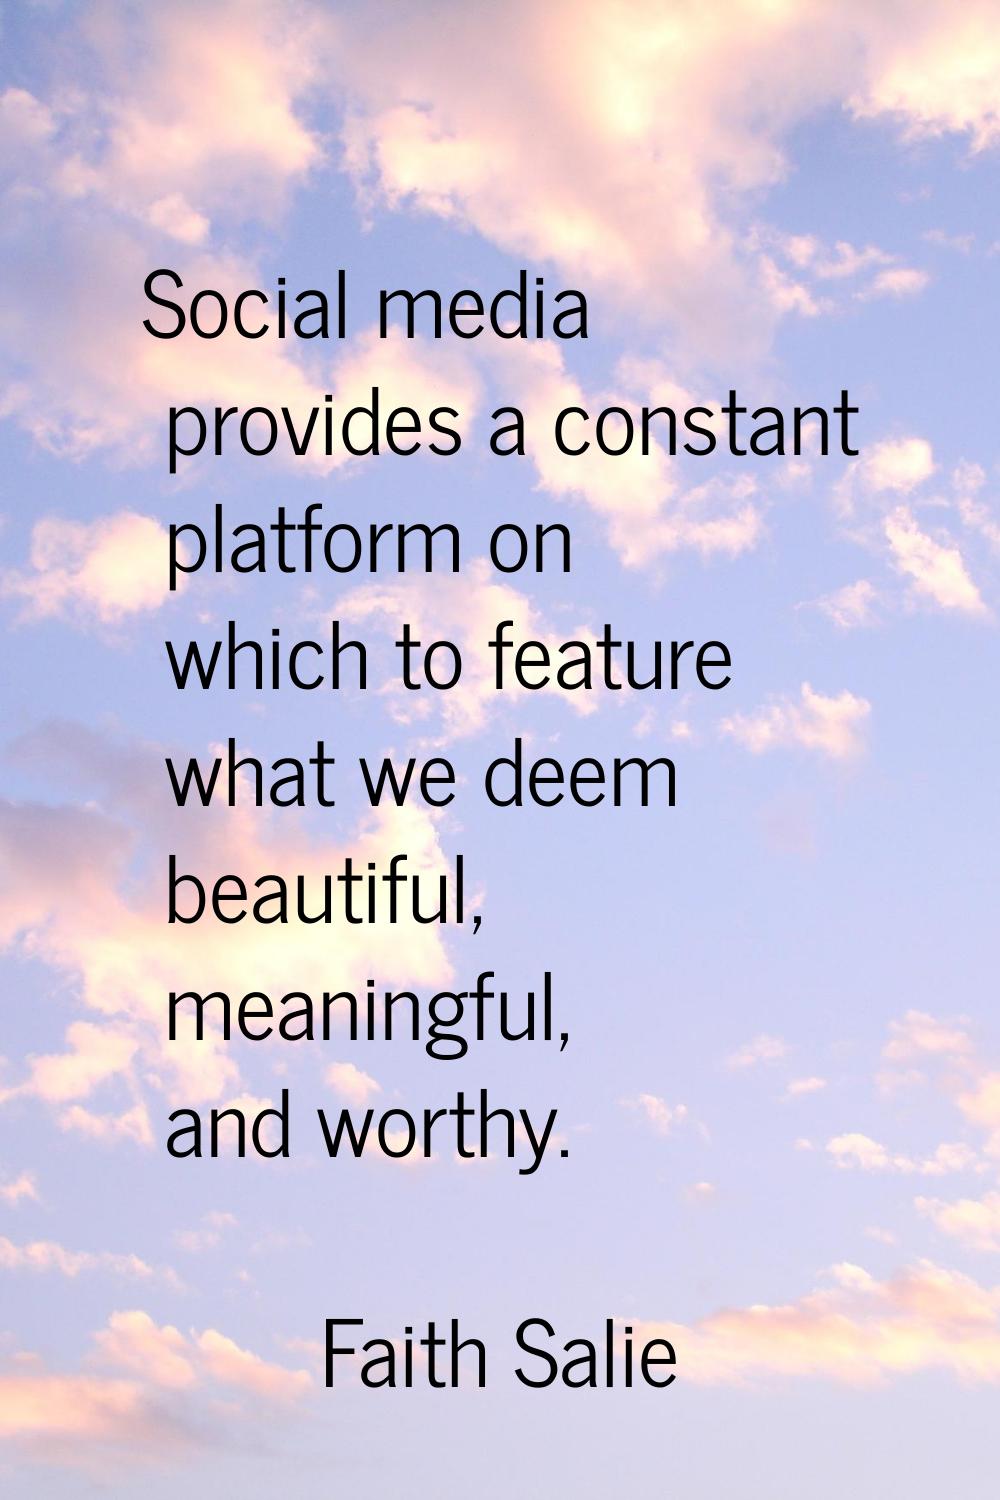 Social media provides a constant platform on which to feature what we deem beautiful, meaningful, a